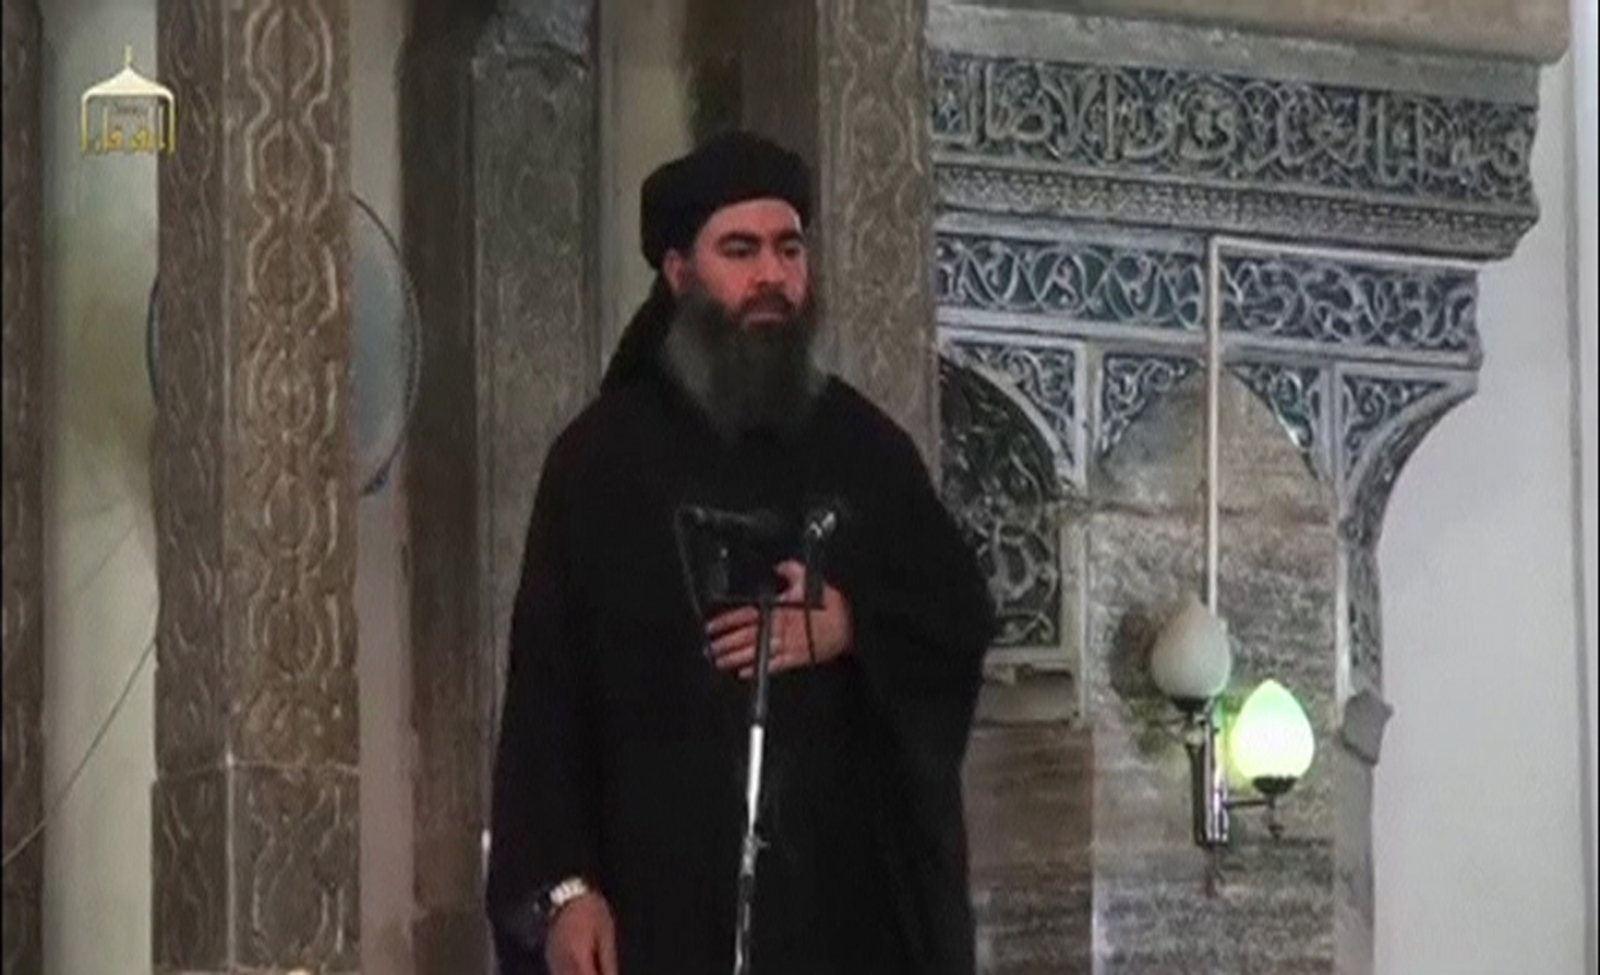 Isis chief Abu Bakr al-Baghdadi, the leader of Iraq-based extremist group Islamic State.